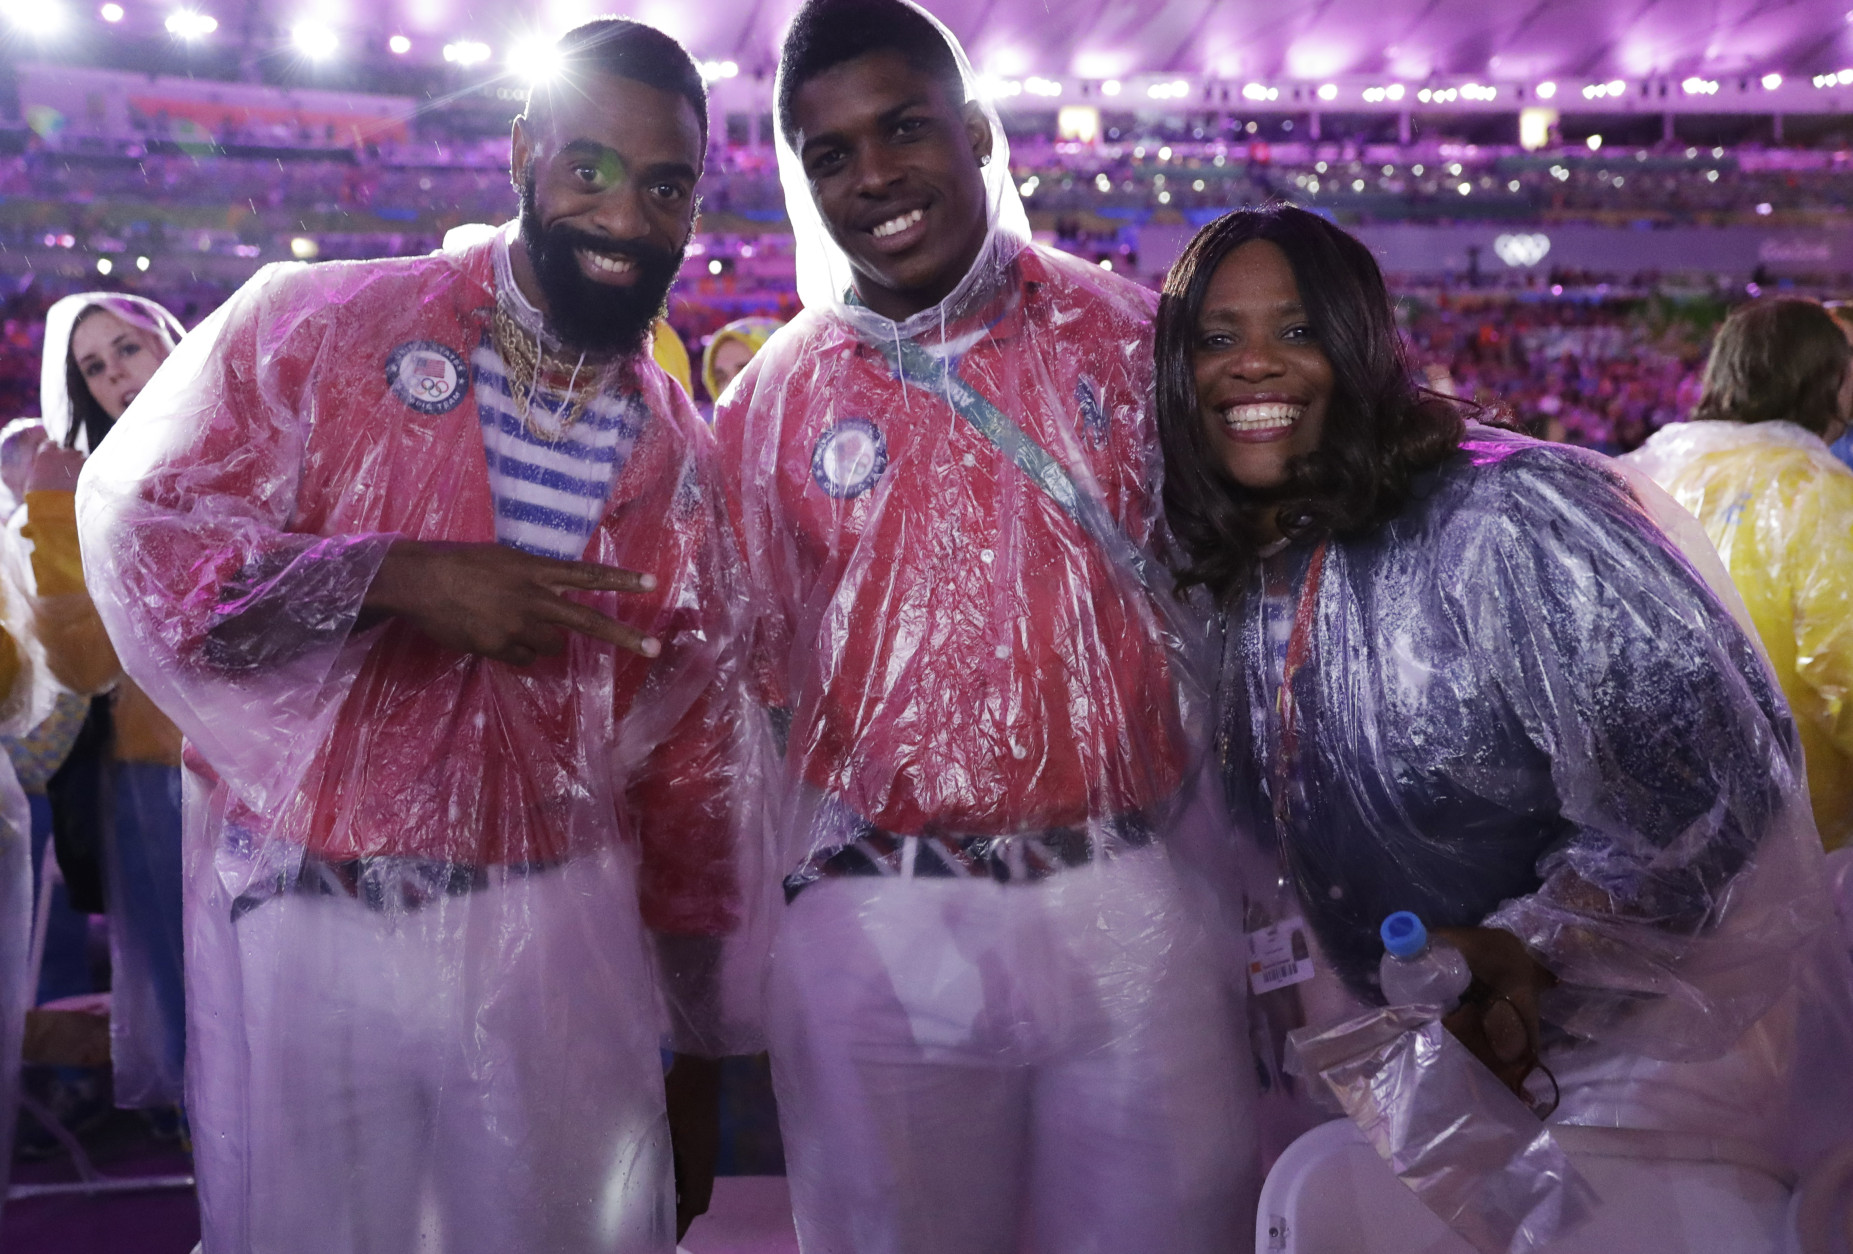 Athletes from the United States pose during the closing ceremony in the Maracana stadium at the 2016 Summer Olympics in Rio de Janeiro, Brazil, Sunday, Aug. 21, 2016. (AP Photo/Matt Dunham)